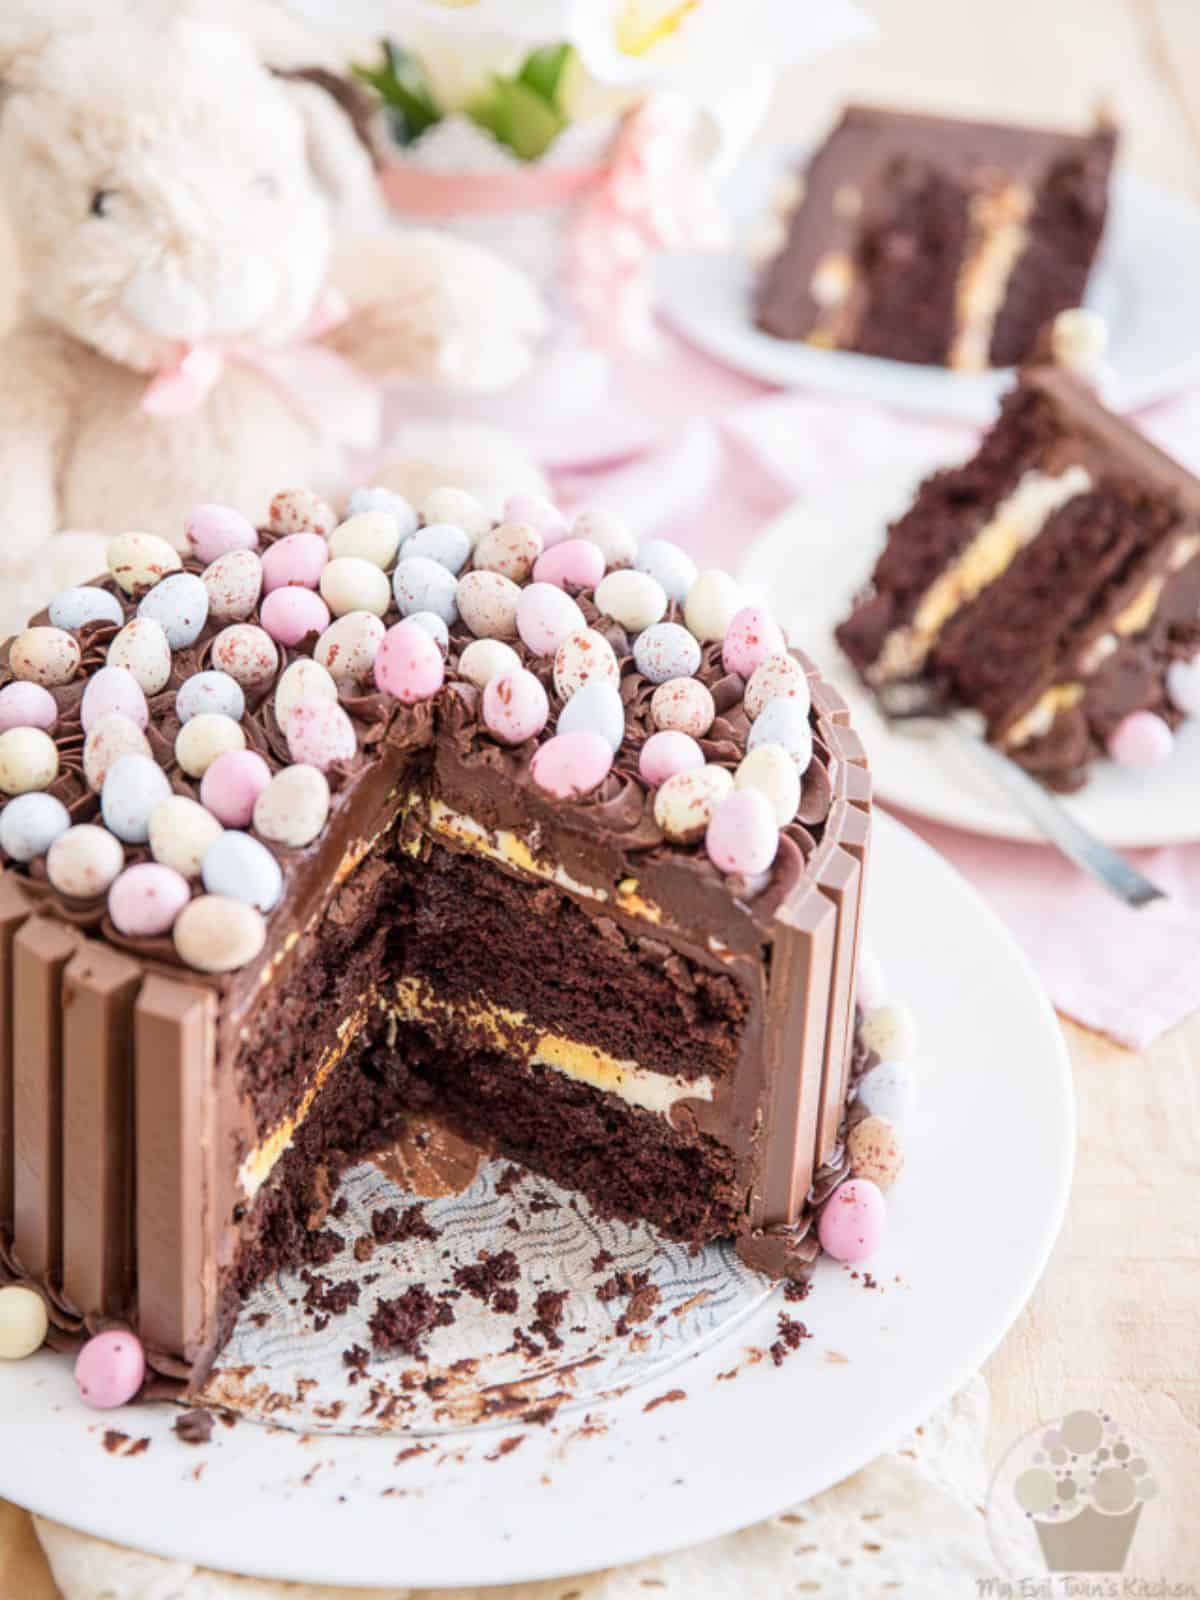 a decadent KitKat cake topped with delightful egg-shaped chocolates.